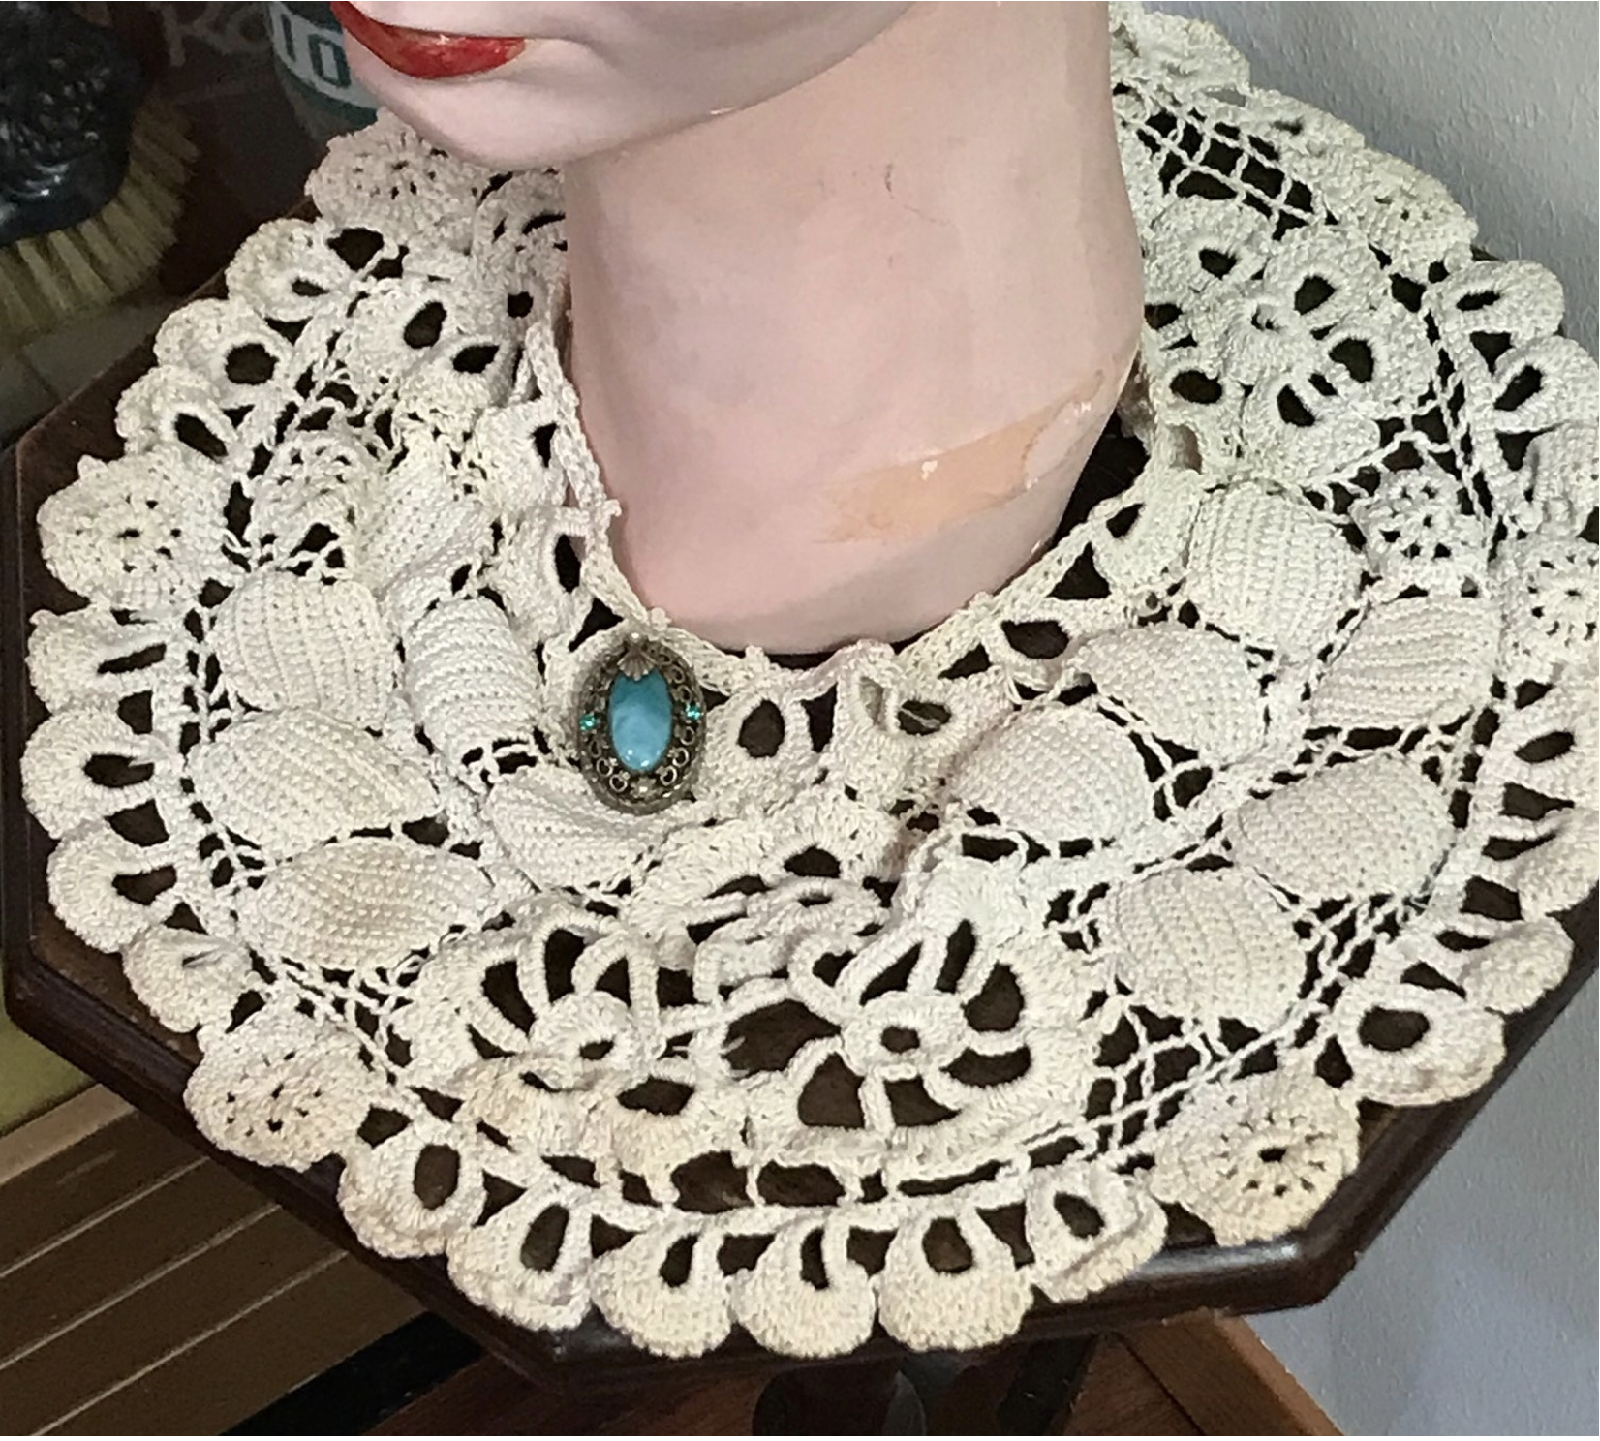 A photograph of a museum display form wearing crocheted collar with a round brooch in the center